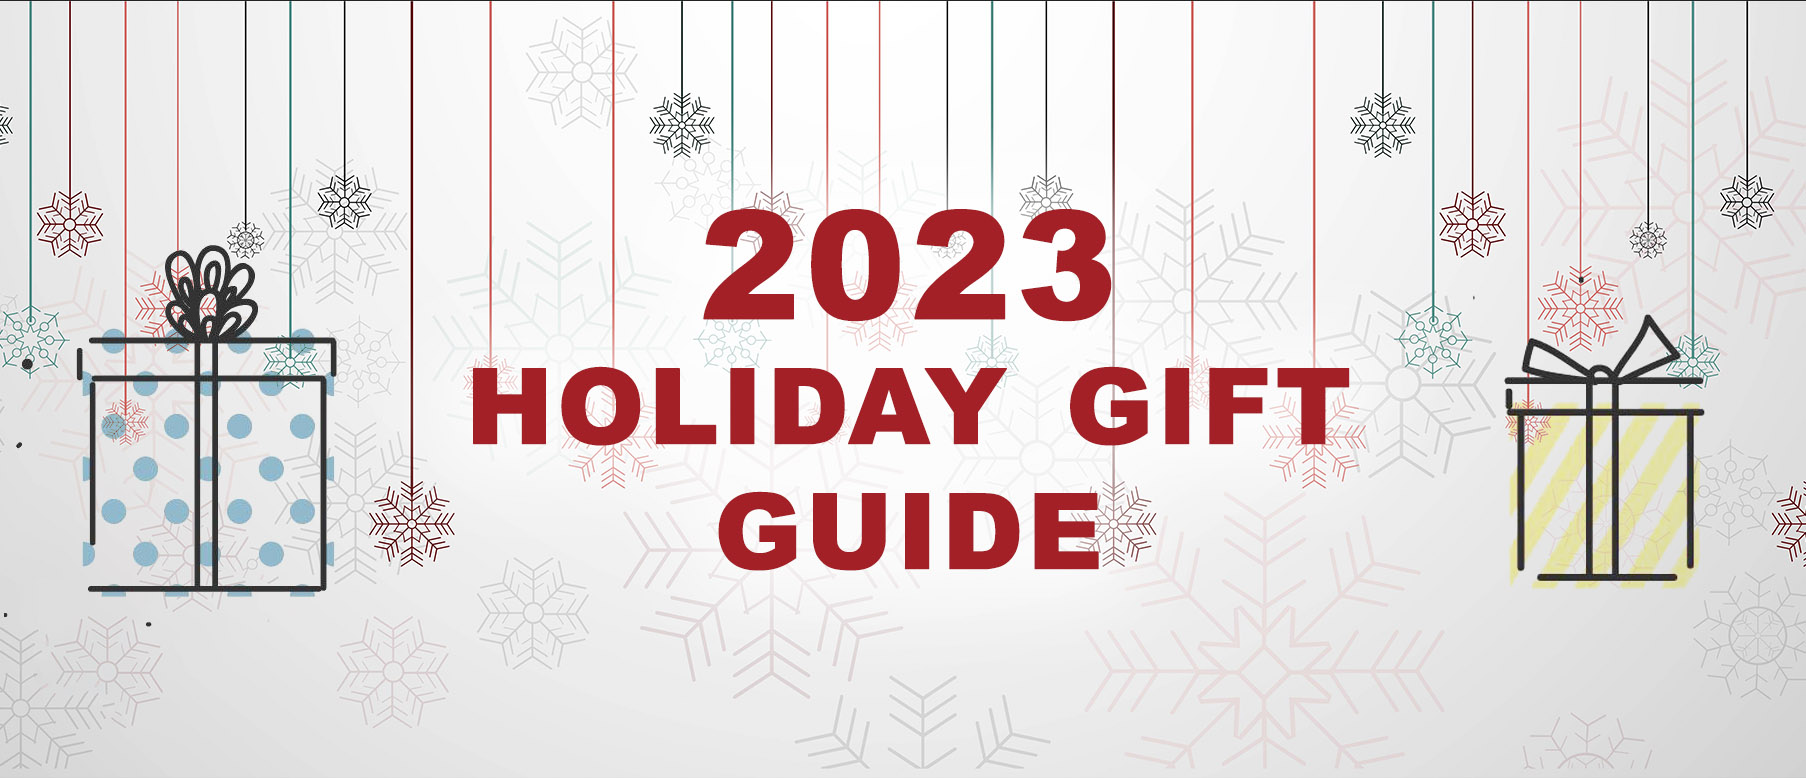 University City Holiday Gift Guide